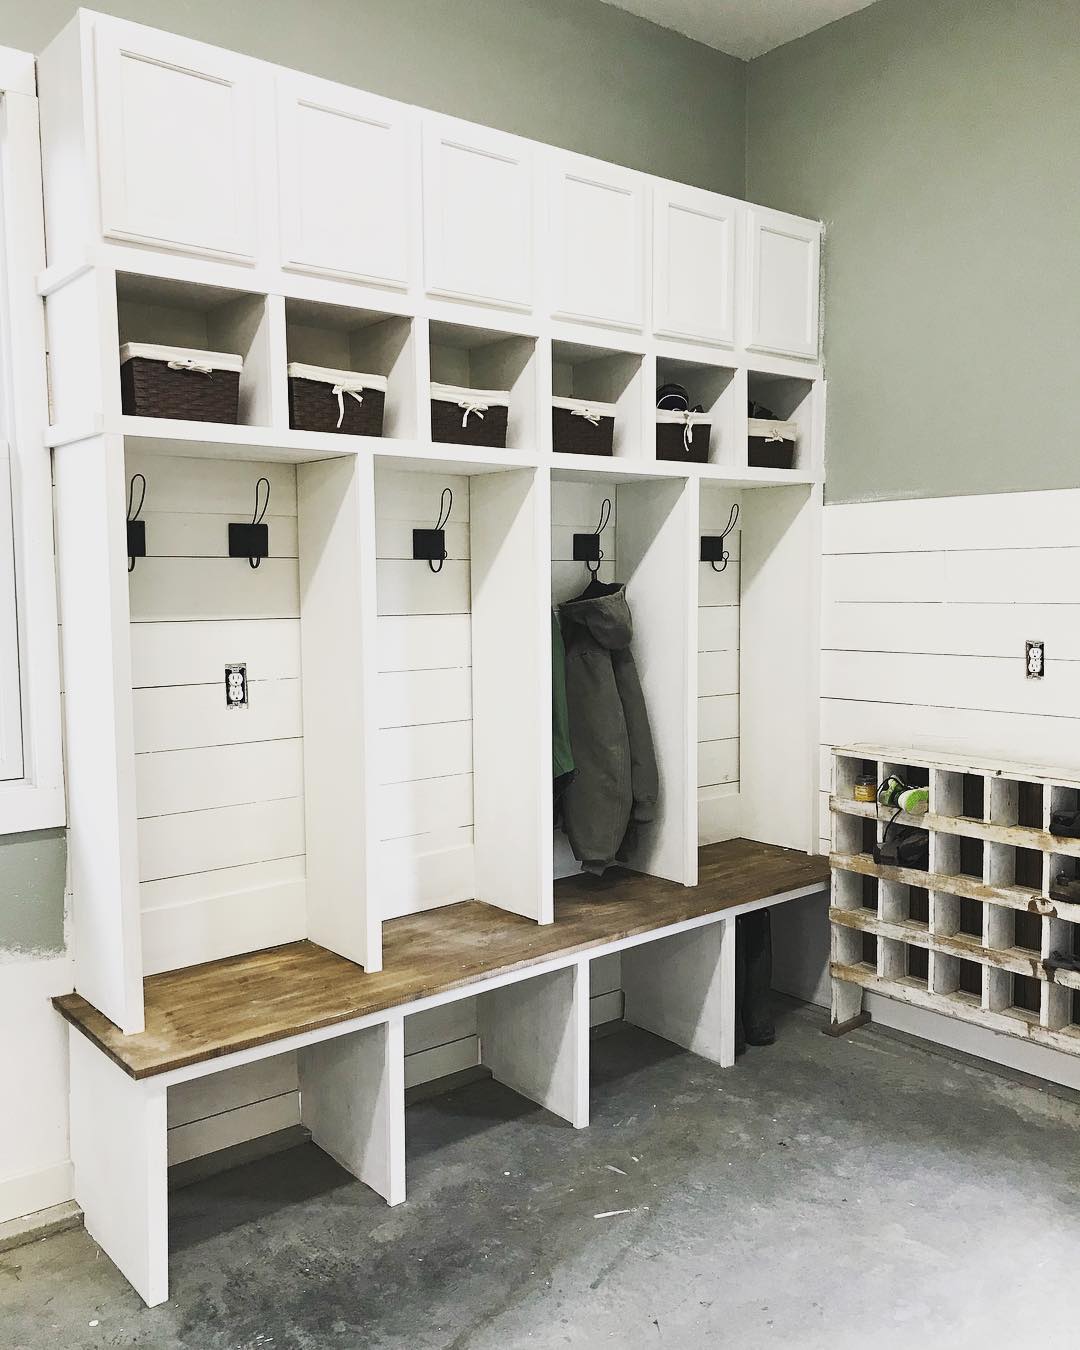 finished garage with mudroom shelving built in photo by Instagram user @cottontailfarmhouse